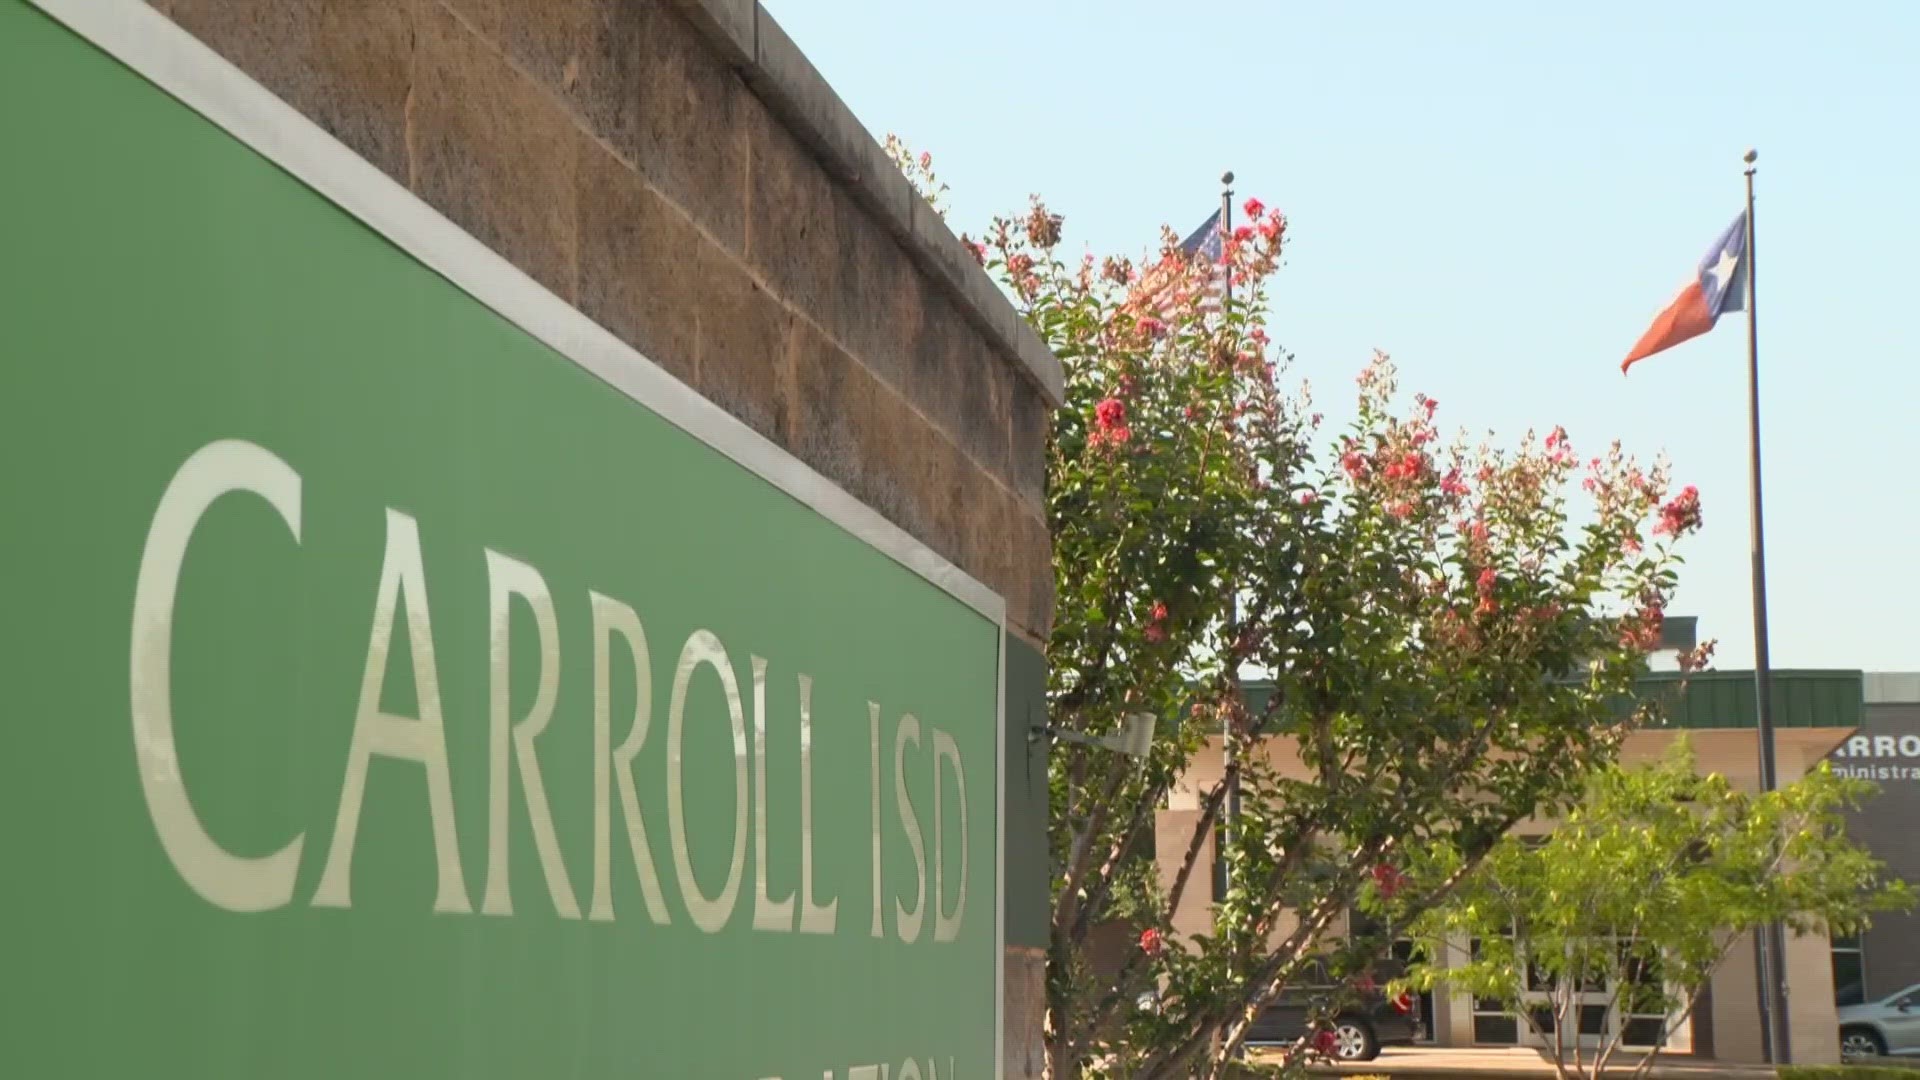 Carroll ISD’s school board voted Monday evening on three policies surrounding LGBTQ students in the district.